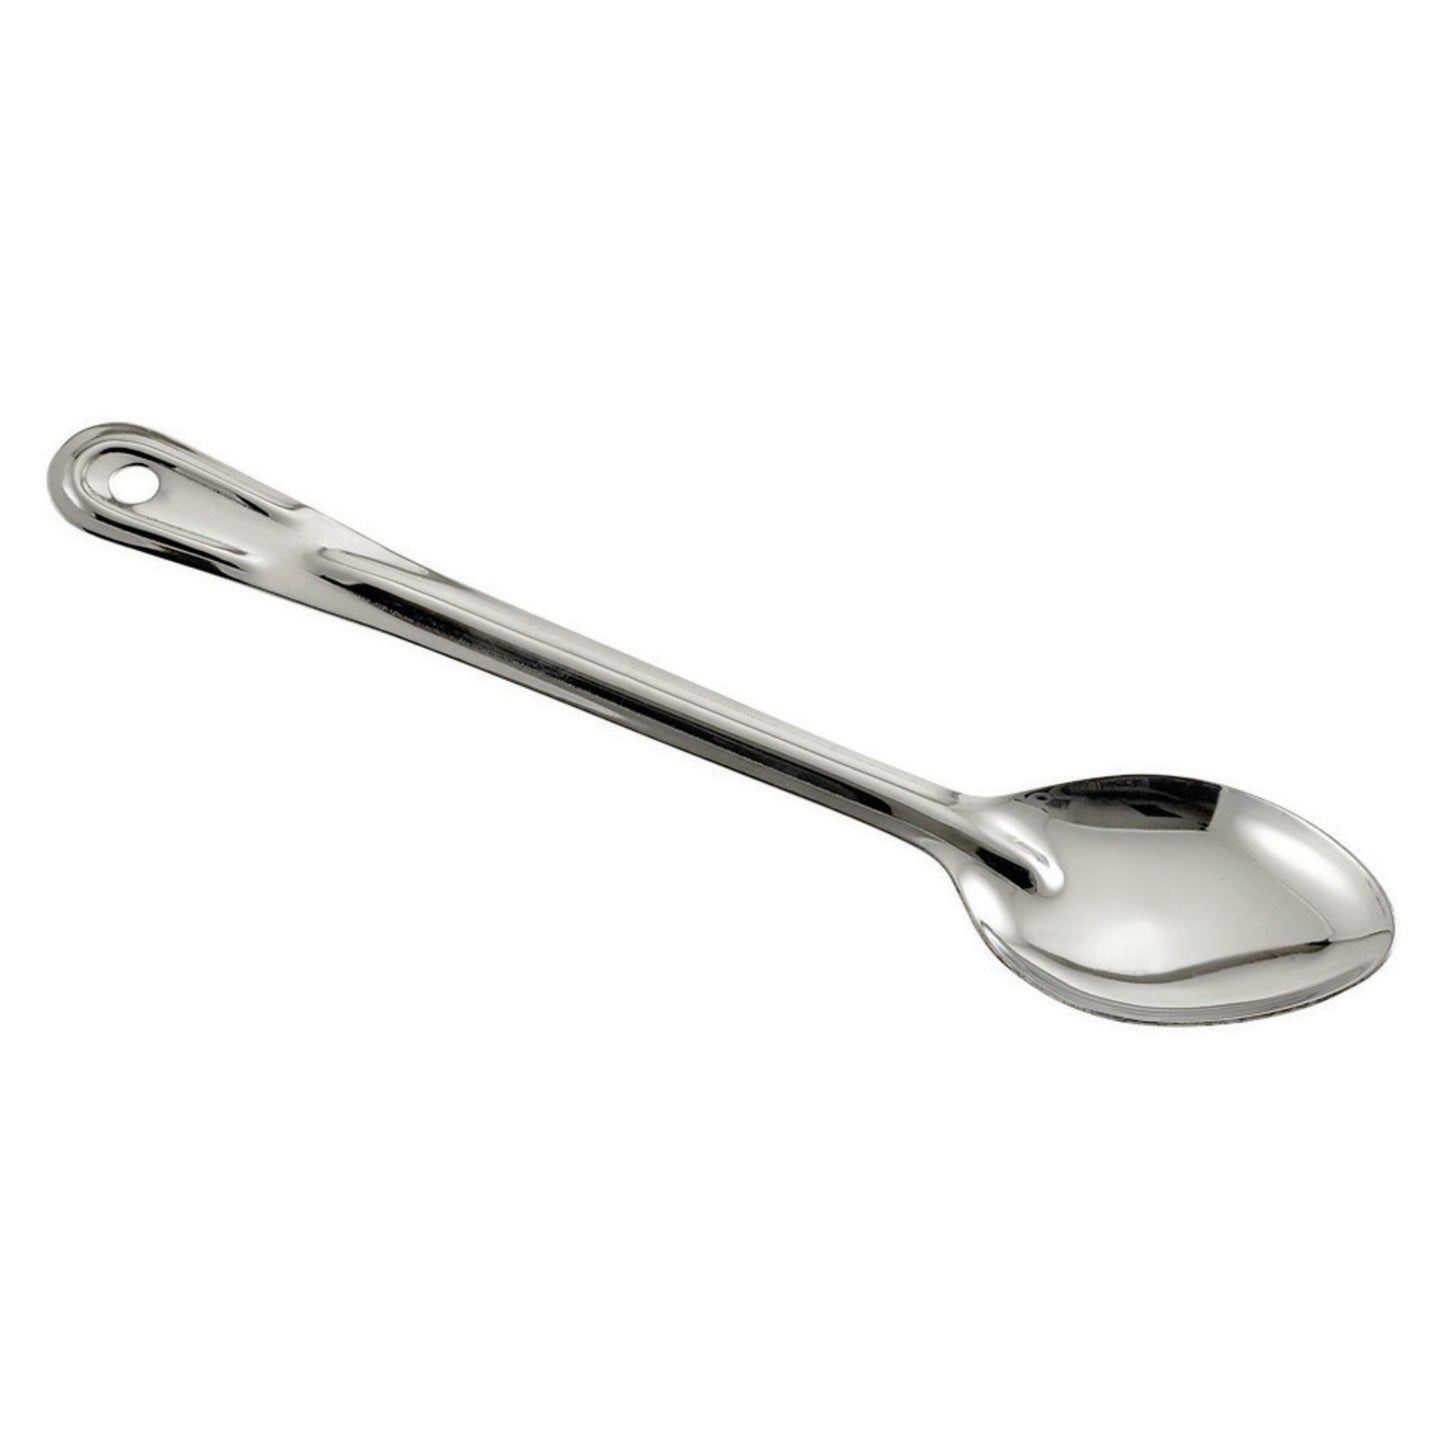 Heavy-Duty Basting Spoon, Stainless Steel, 1.5mm - Solid, 11"